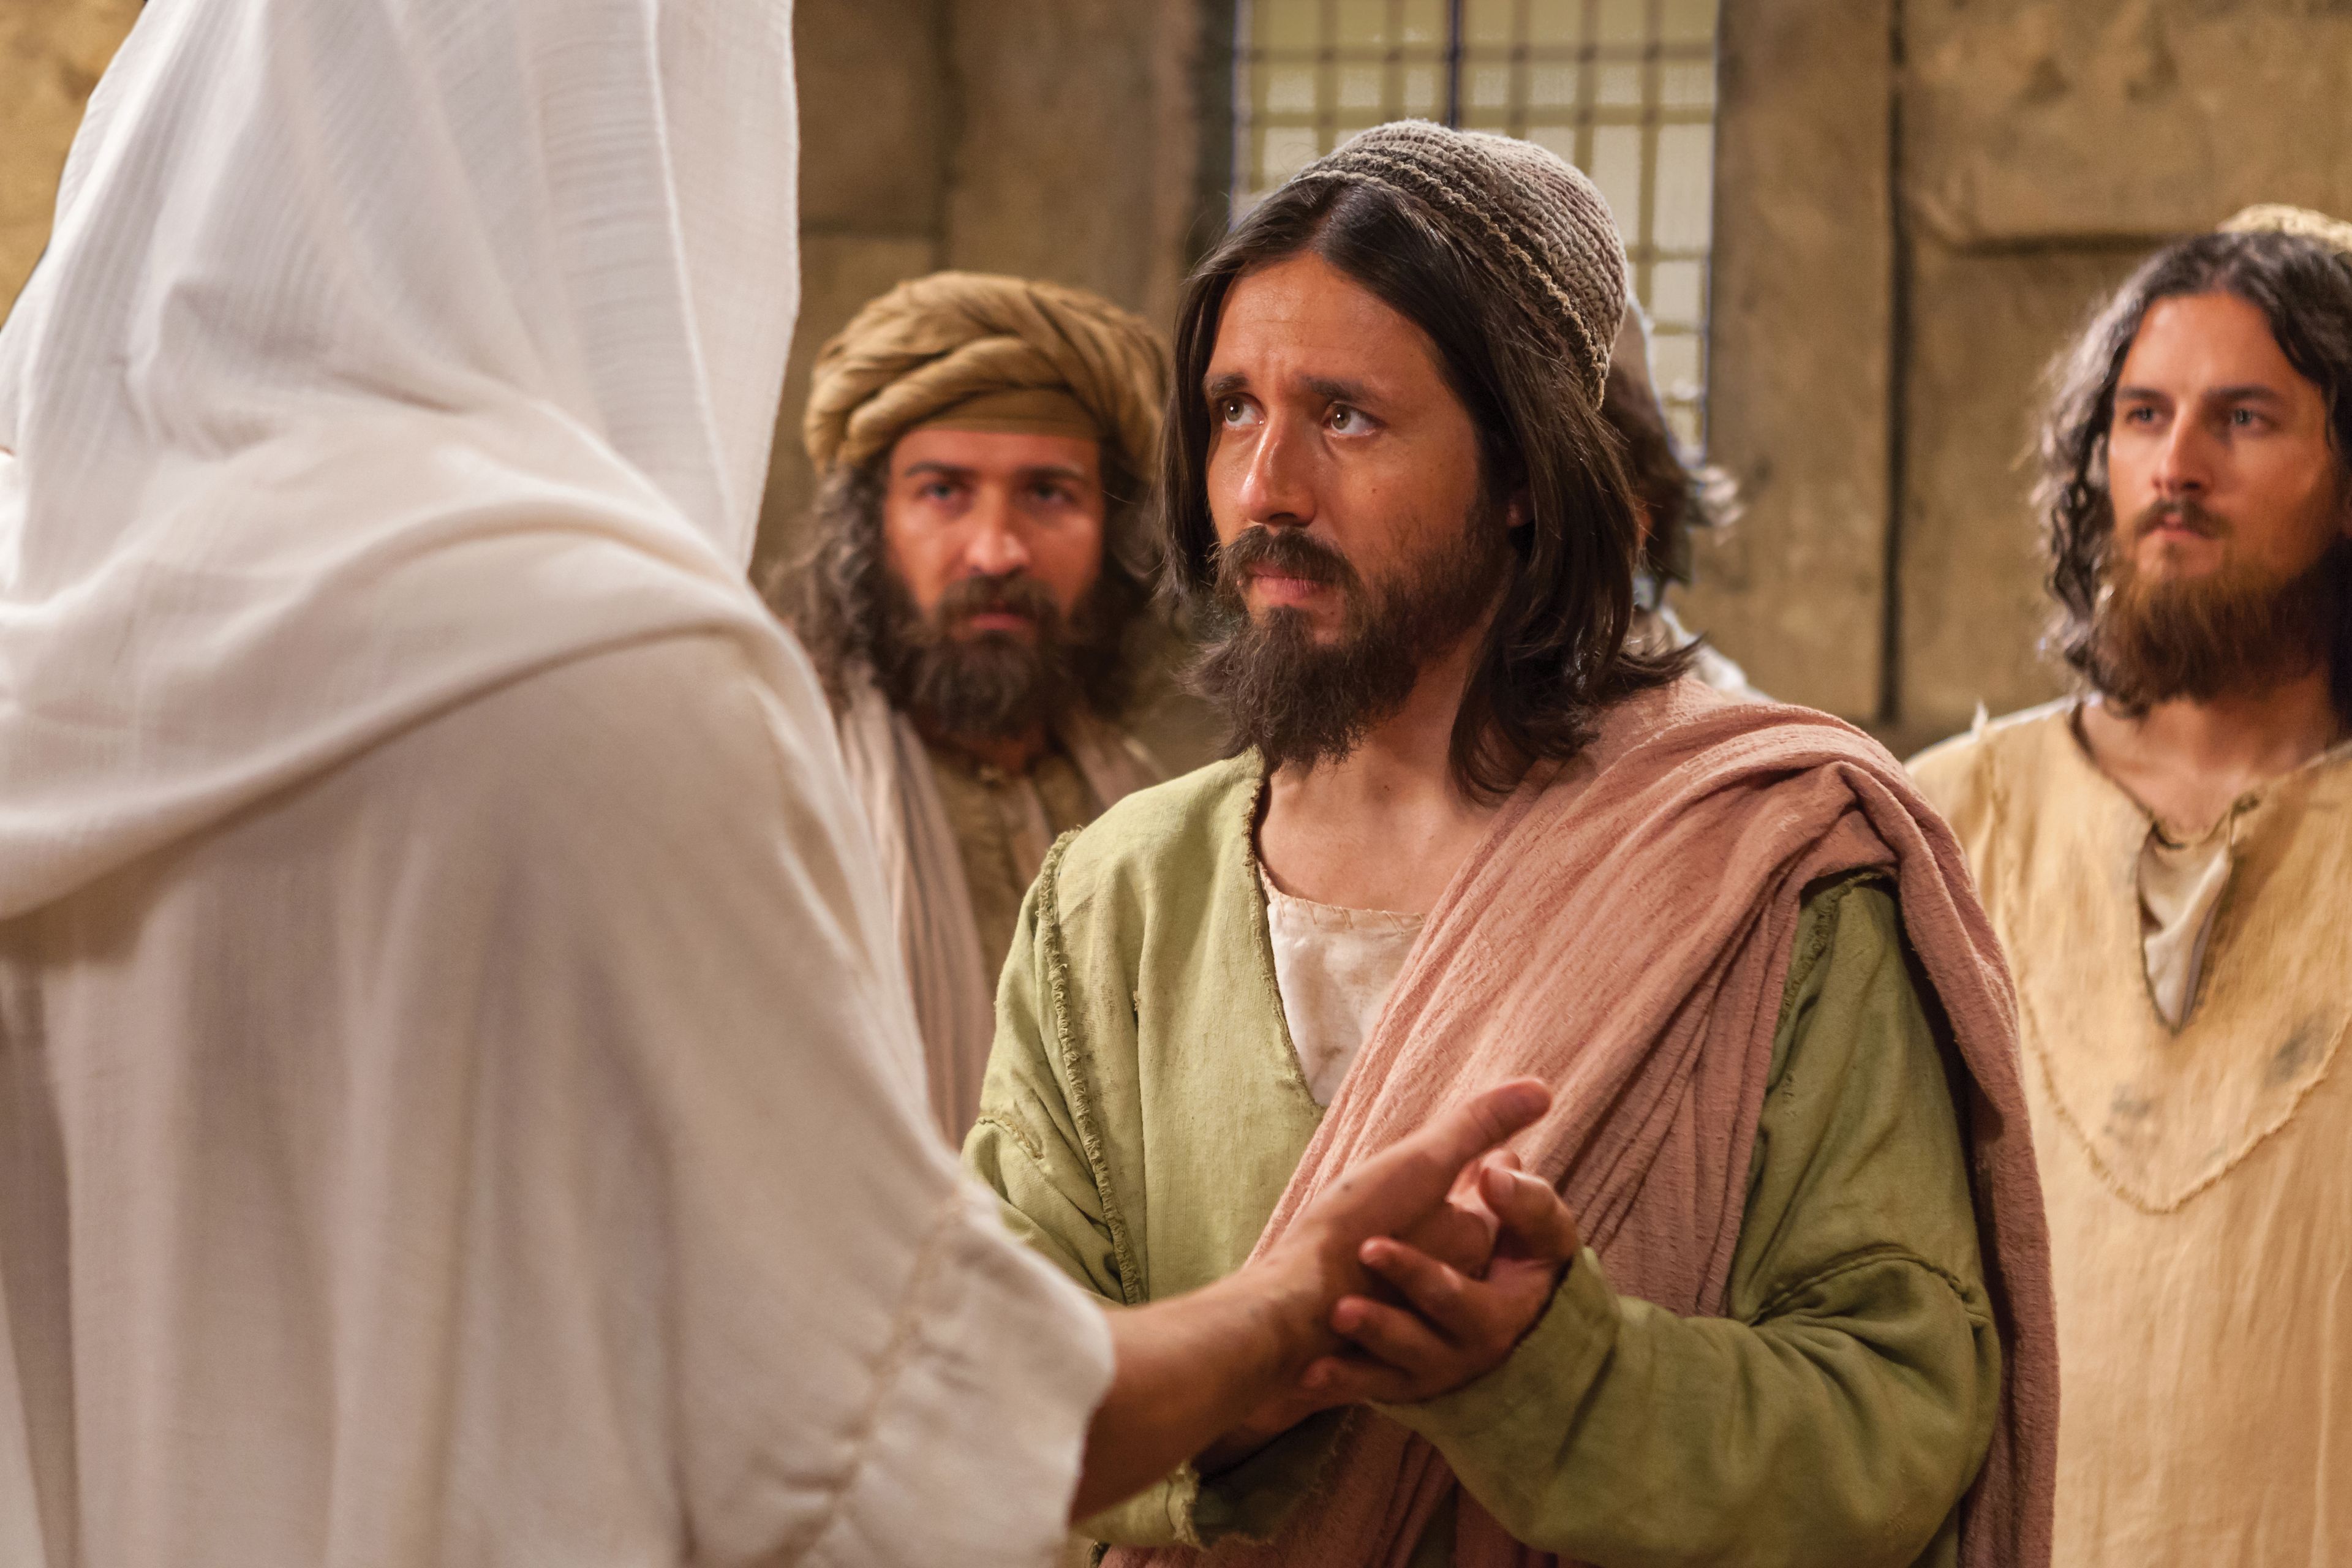 Christ approaches Thomas after Thomas declares that he will not believe unless he sees.